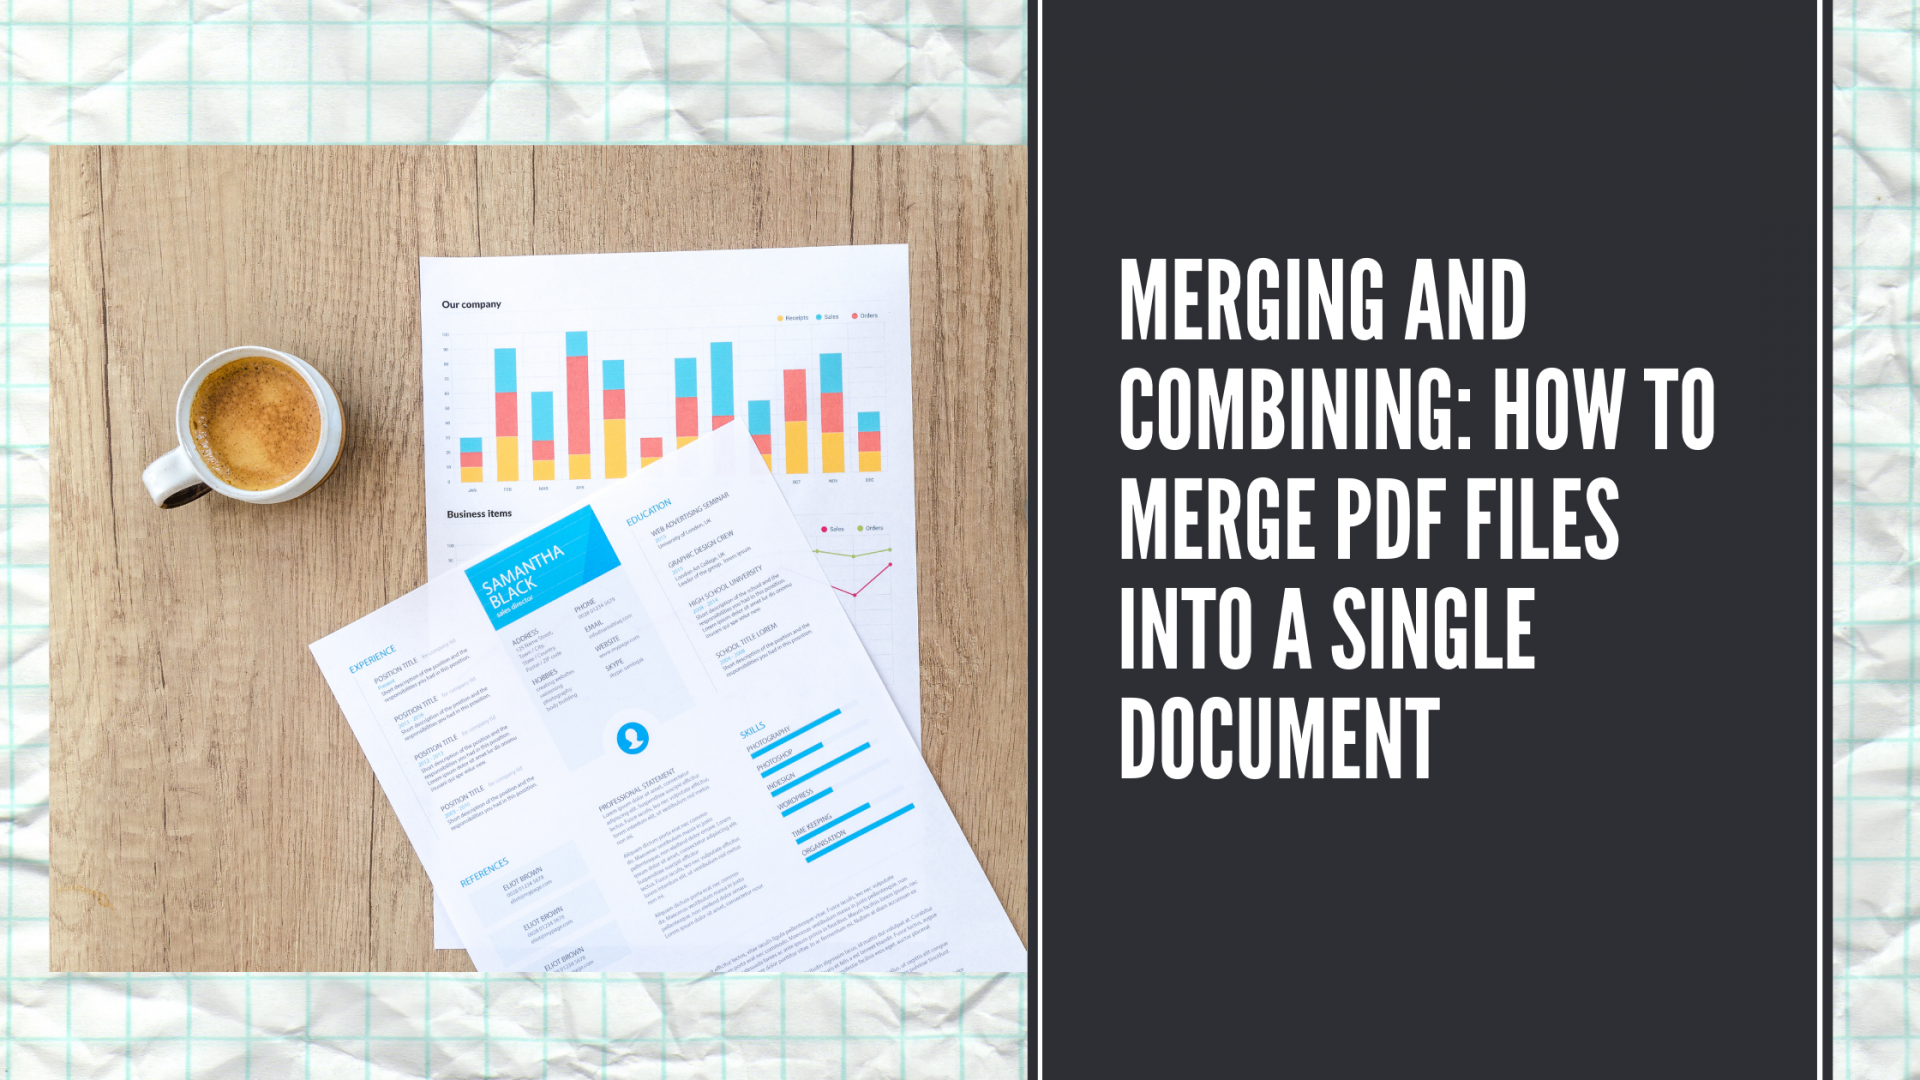 Merging And Combining: How To Merge PDF Files Into A Single Document